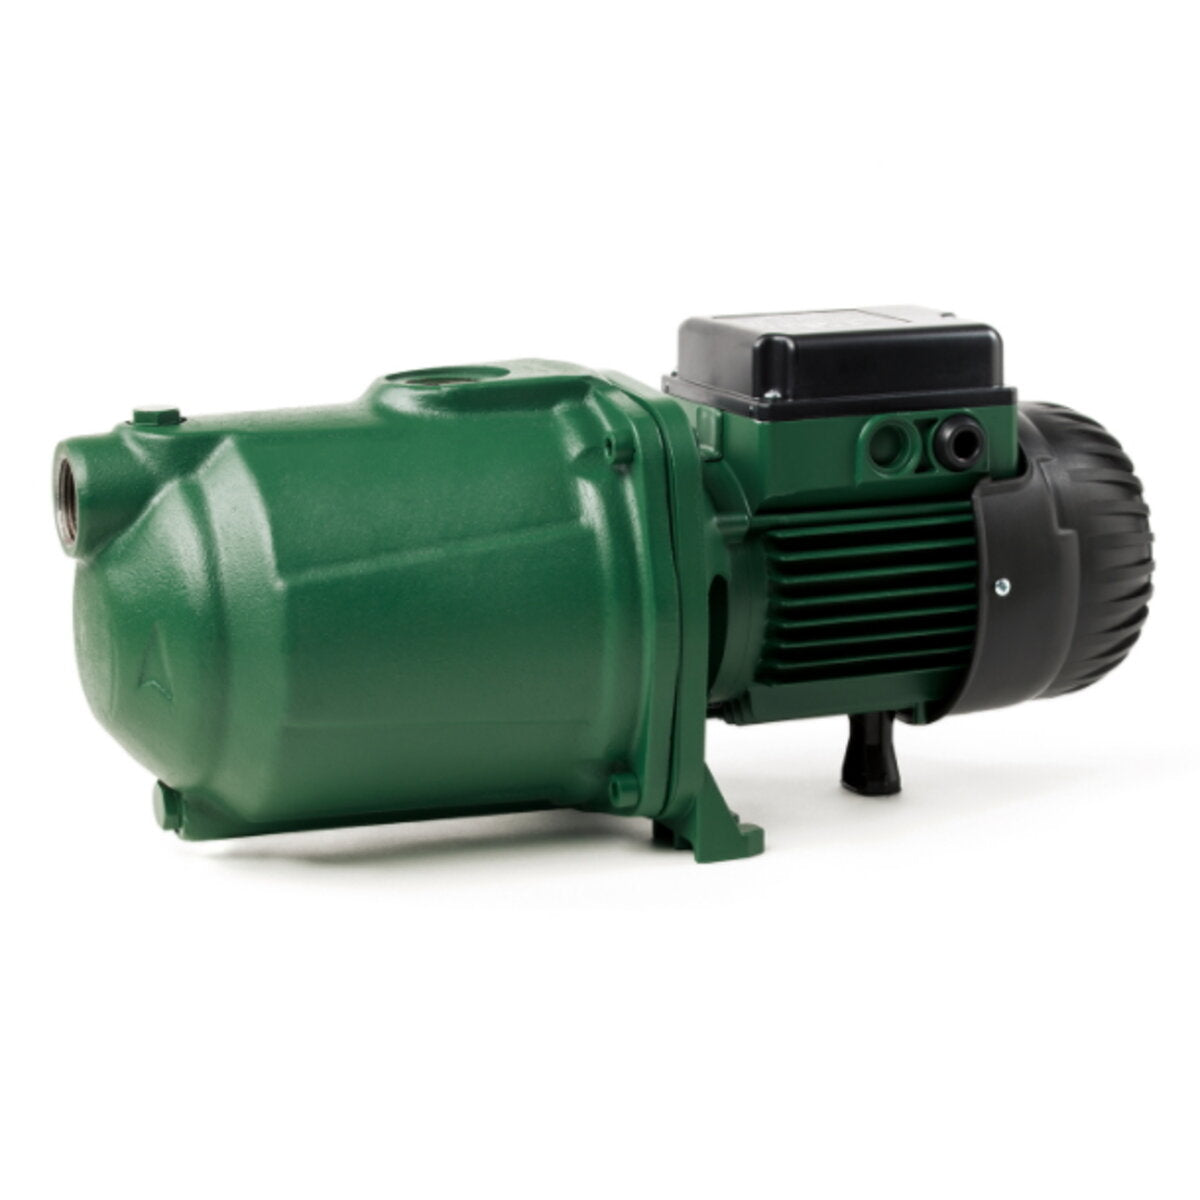 DAB EURO 30/50 M IE2 single-phase multistage centrifugal electric pump